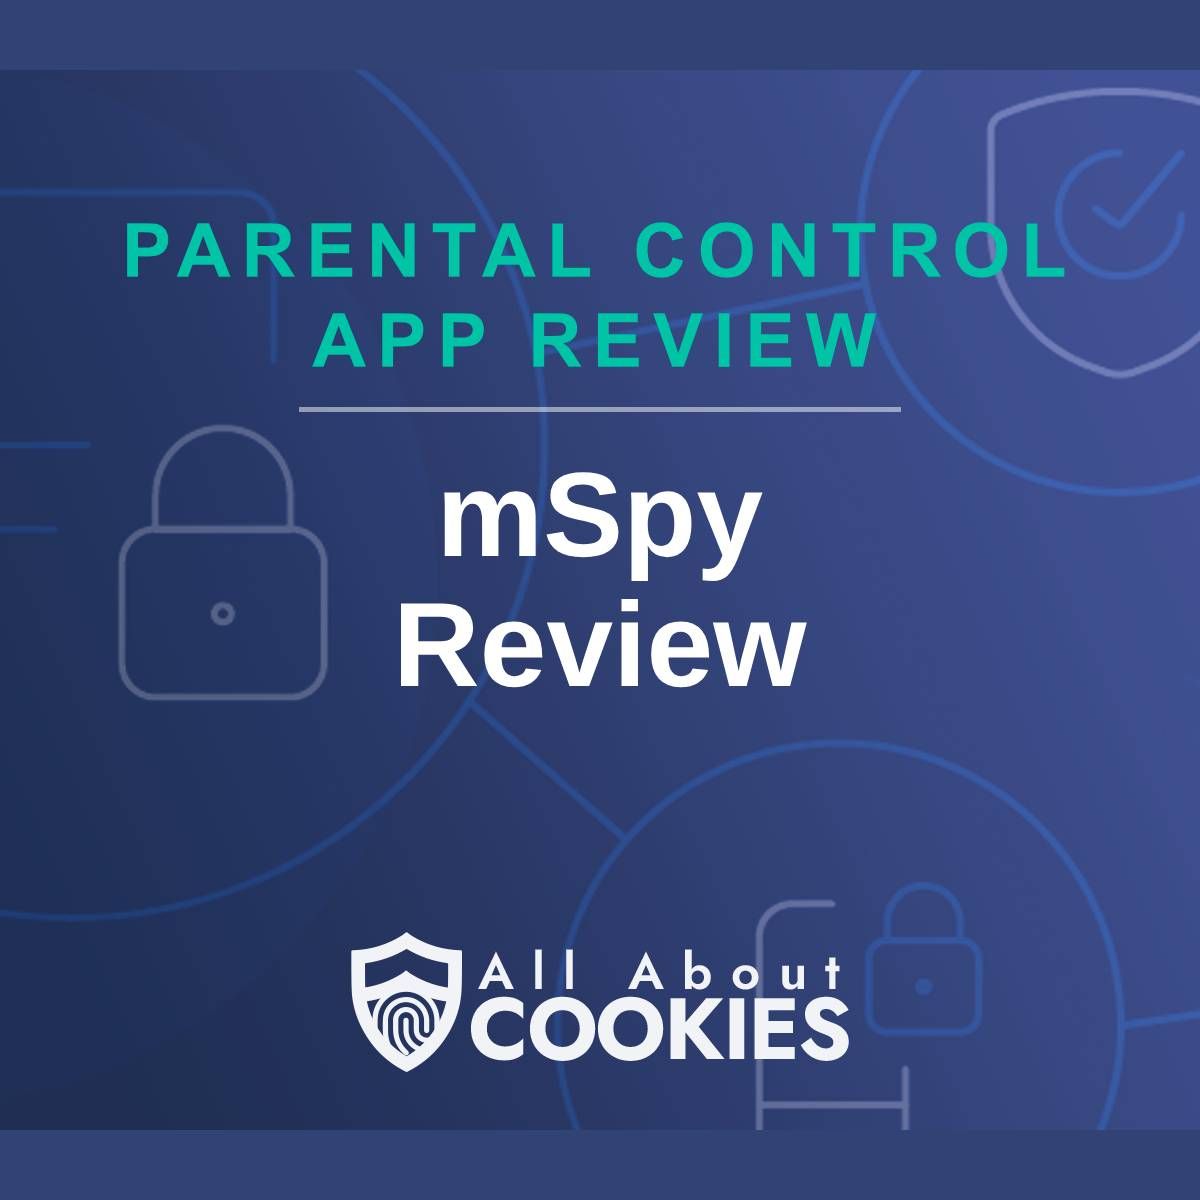 A blue background with images of locks and shields with the text &quot;Parental Control App Review mSpy Review&quot; and the All About Cookies logo.